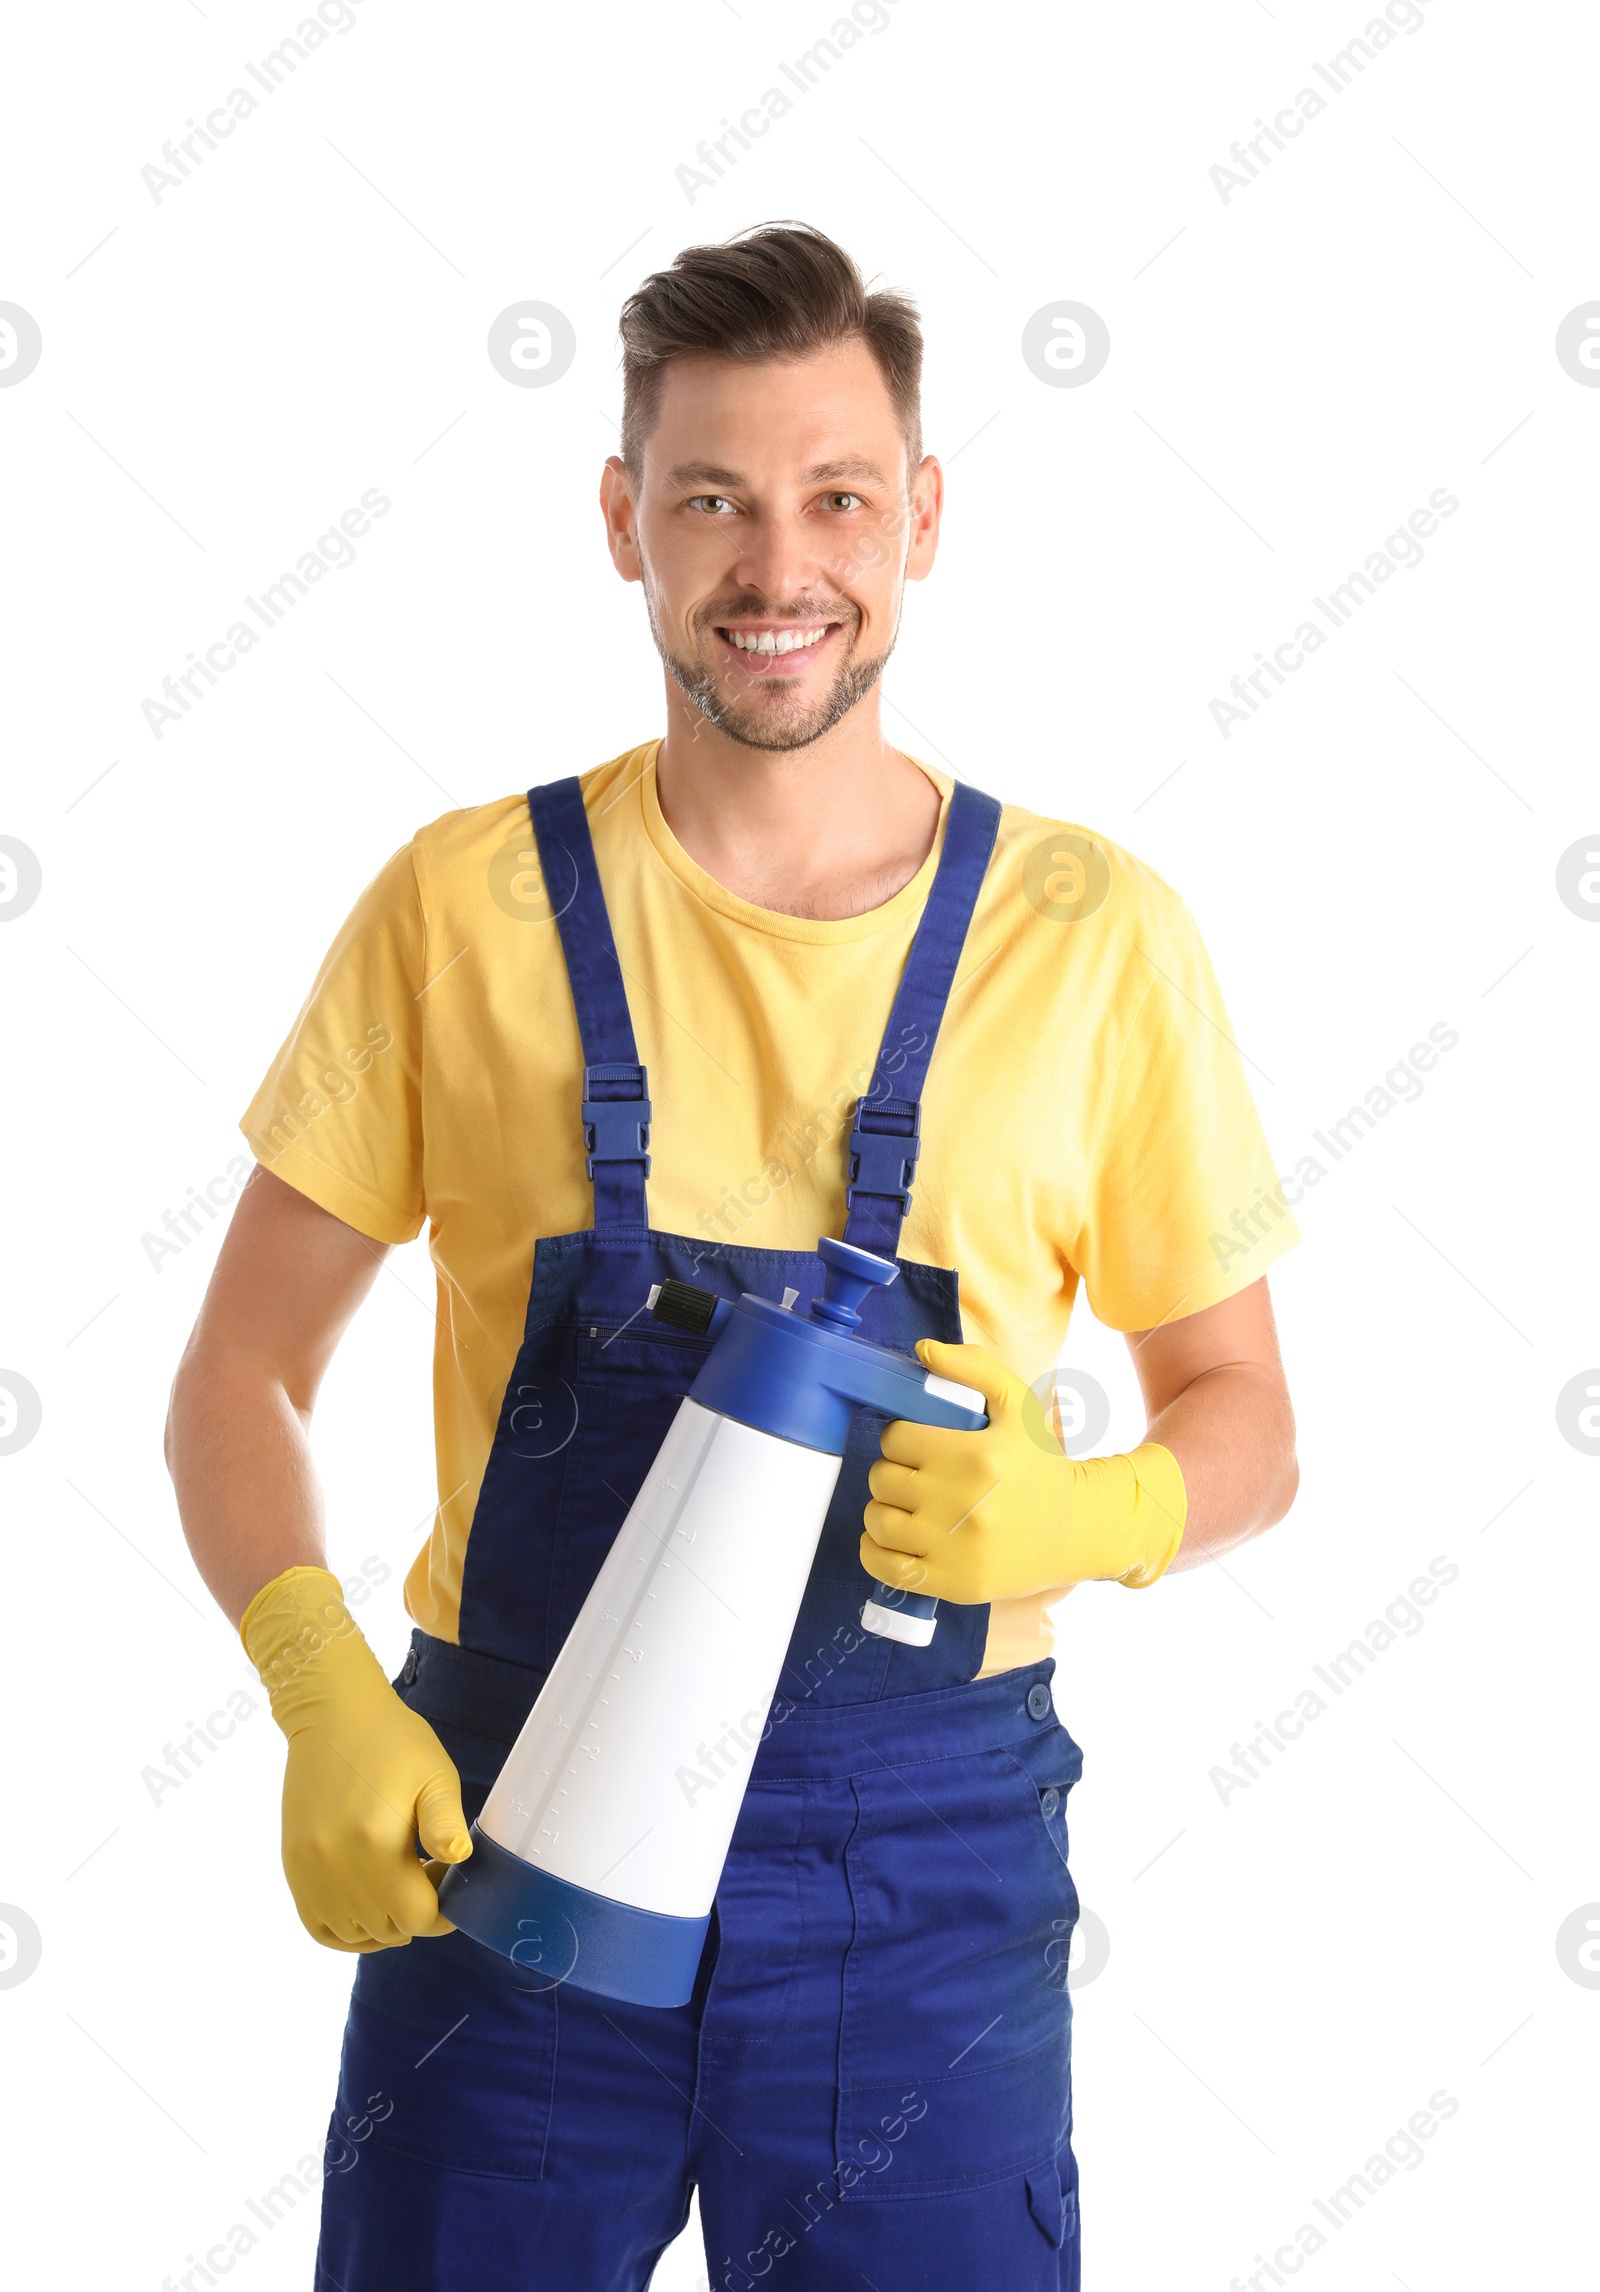 Photo of Male janitor with spray bottle of cleaning product on white background